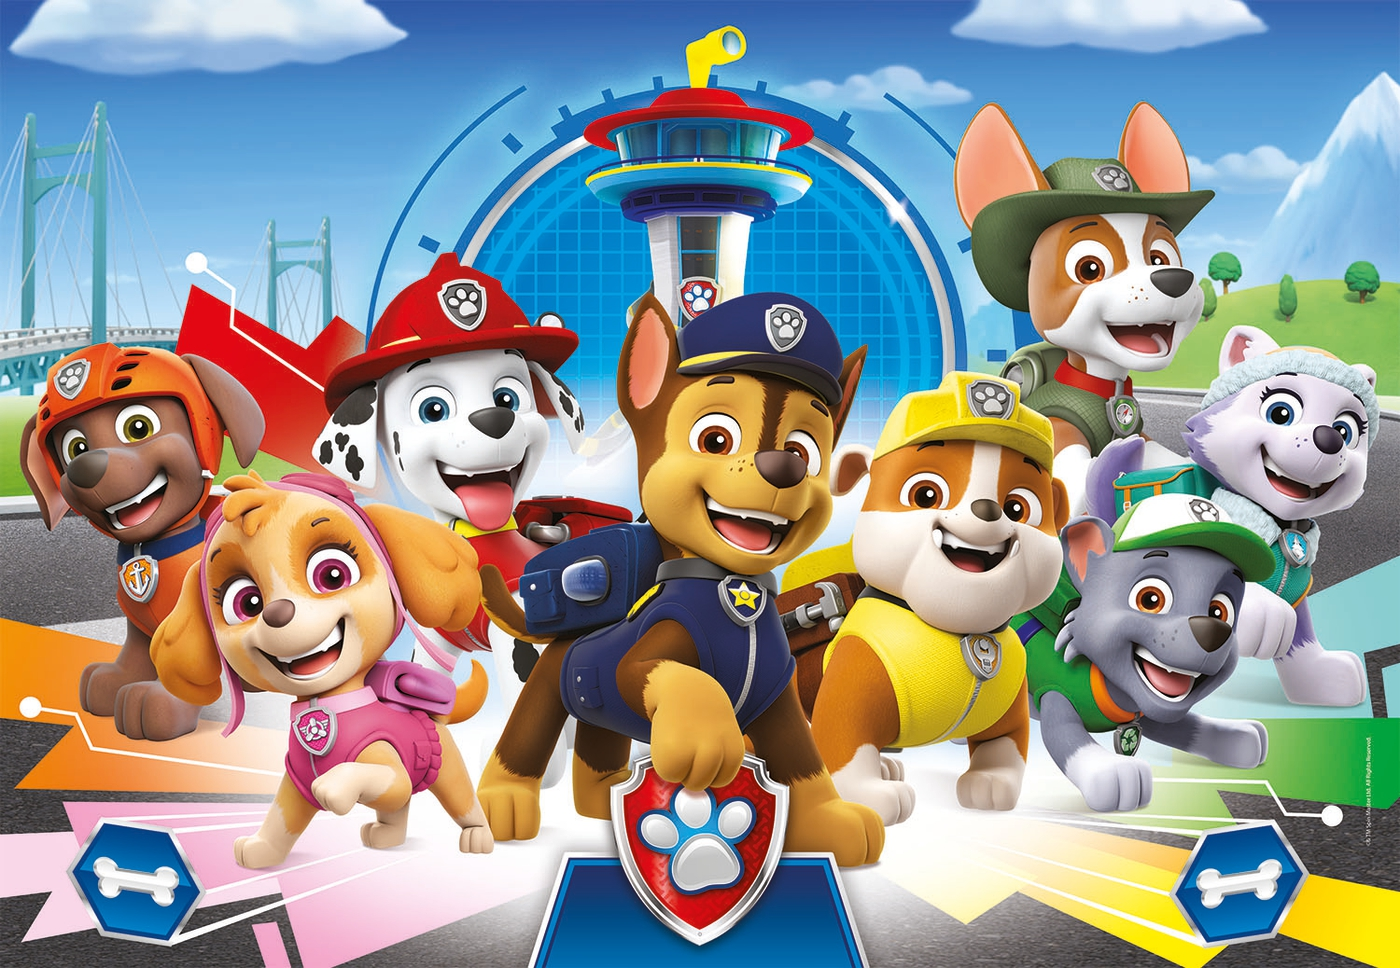 PAW Patrol is a Canadian computer-animated children's television series